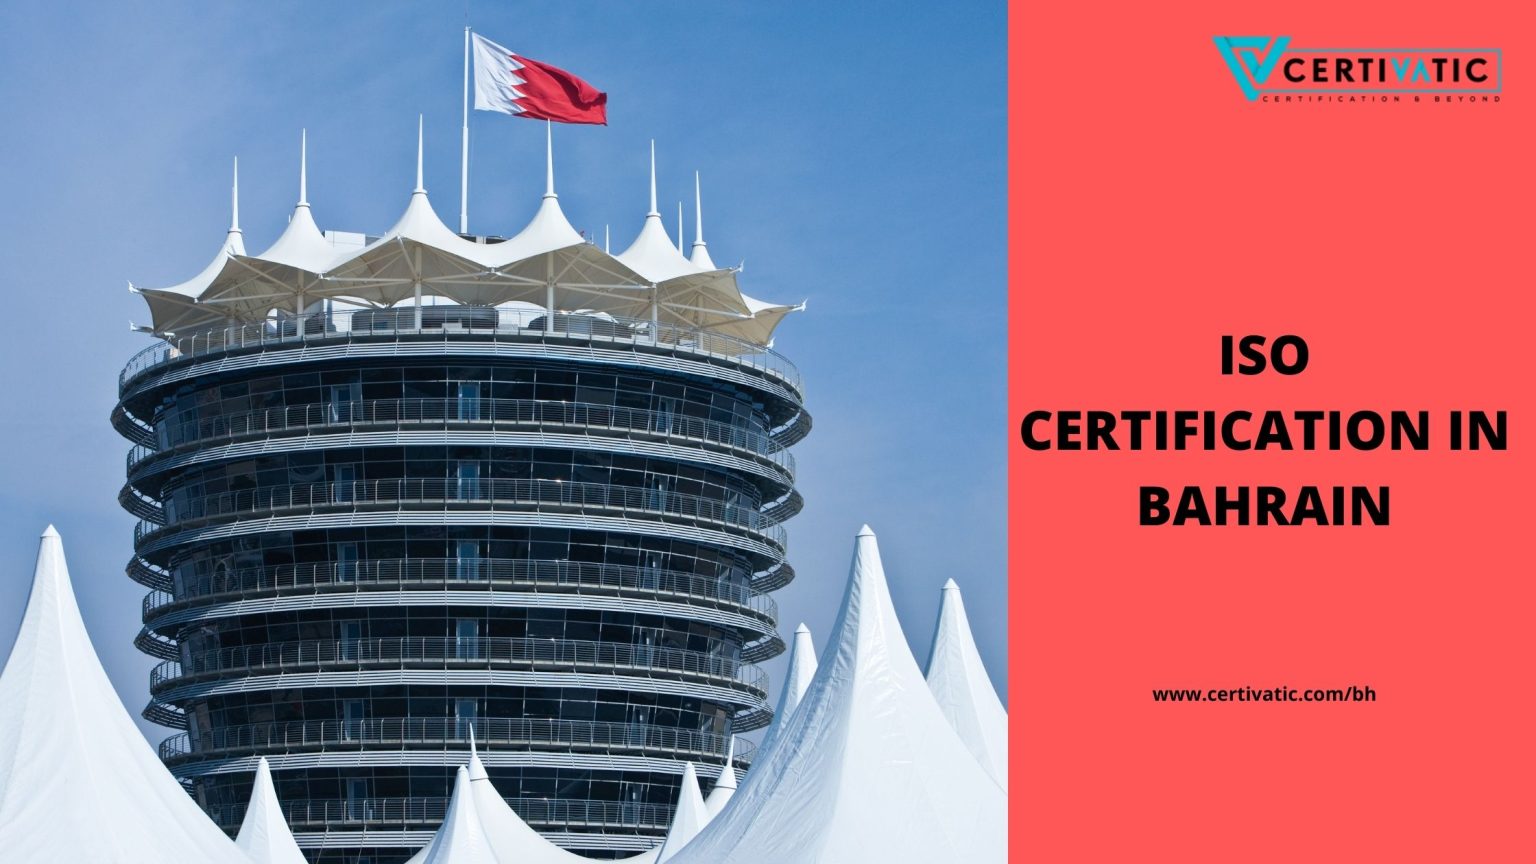 What are benefits and methods to get ISO Certification in Bahrain?